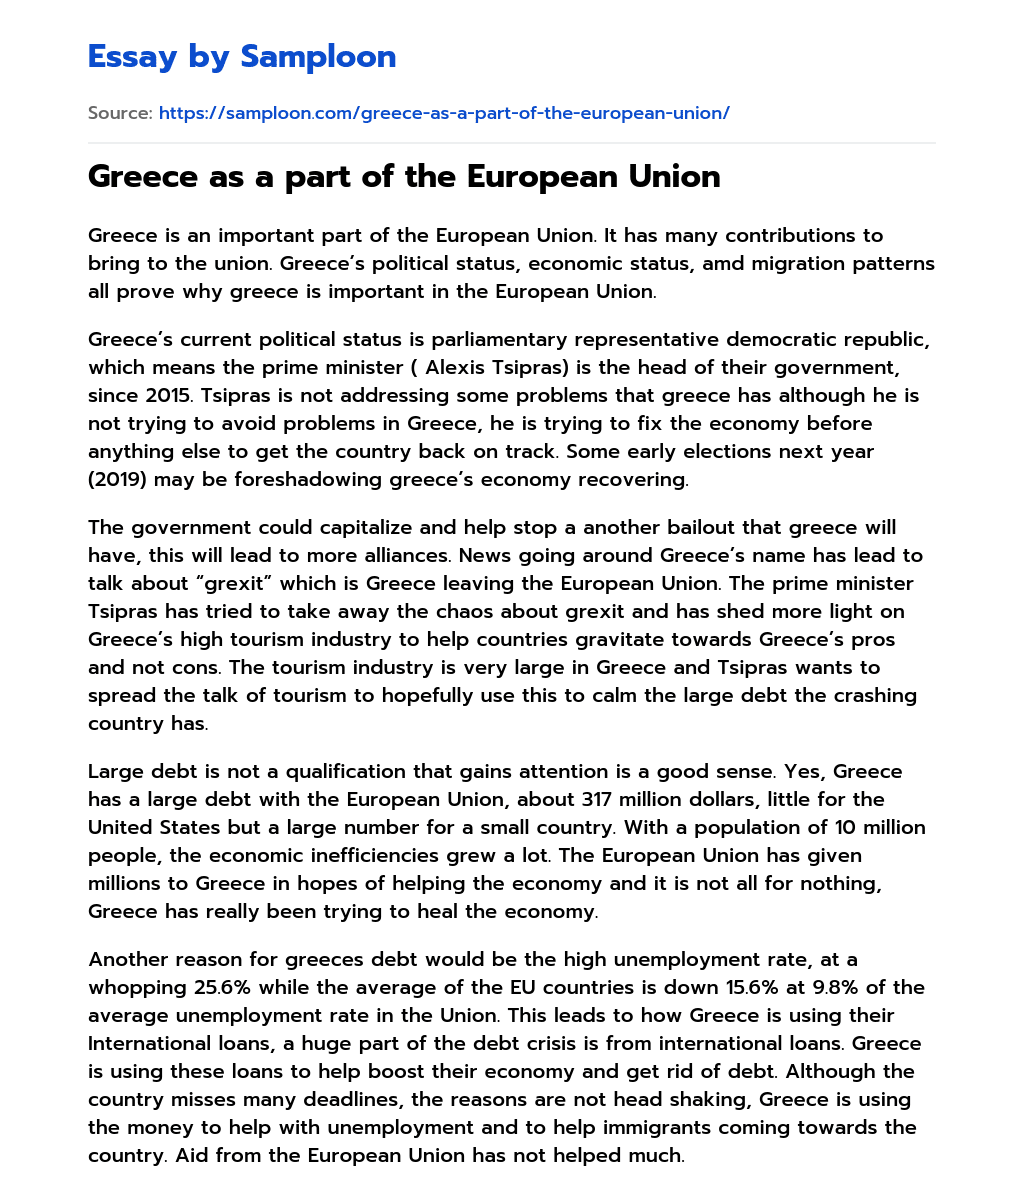 Greece as a part of the European Union essay